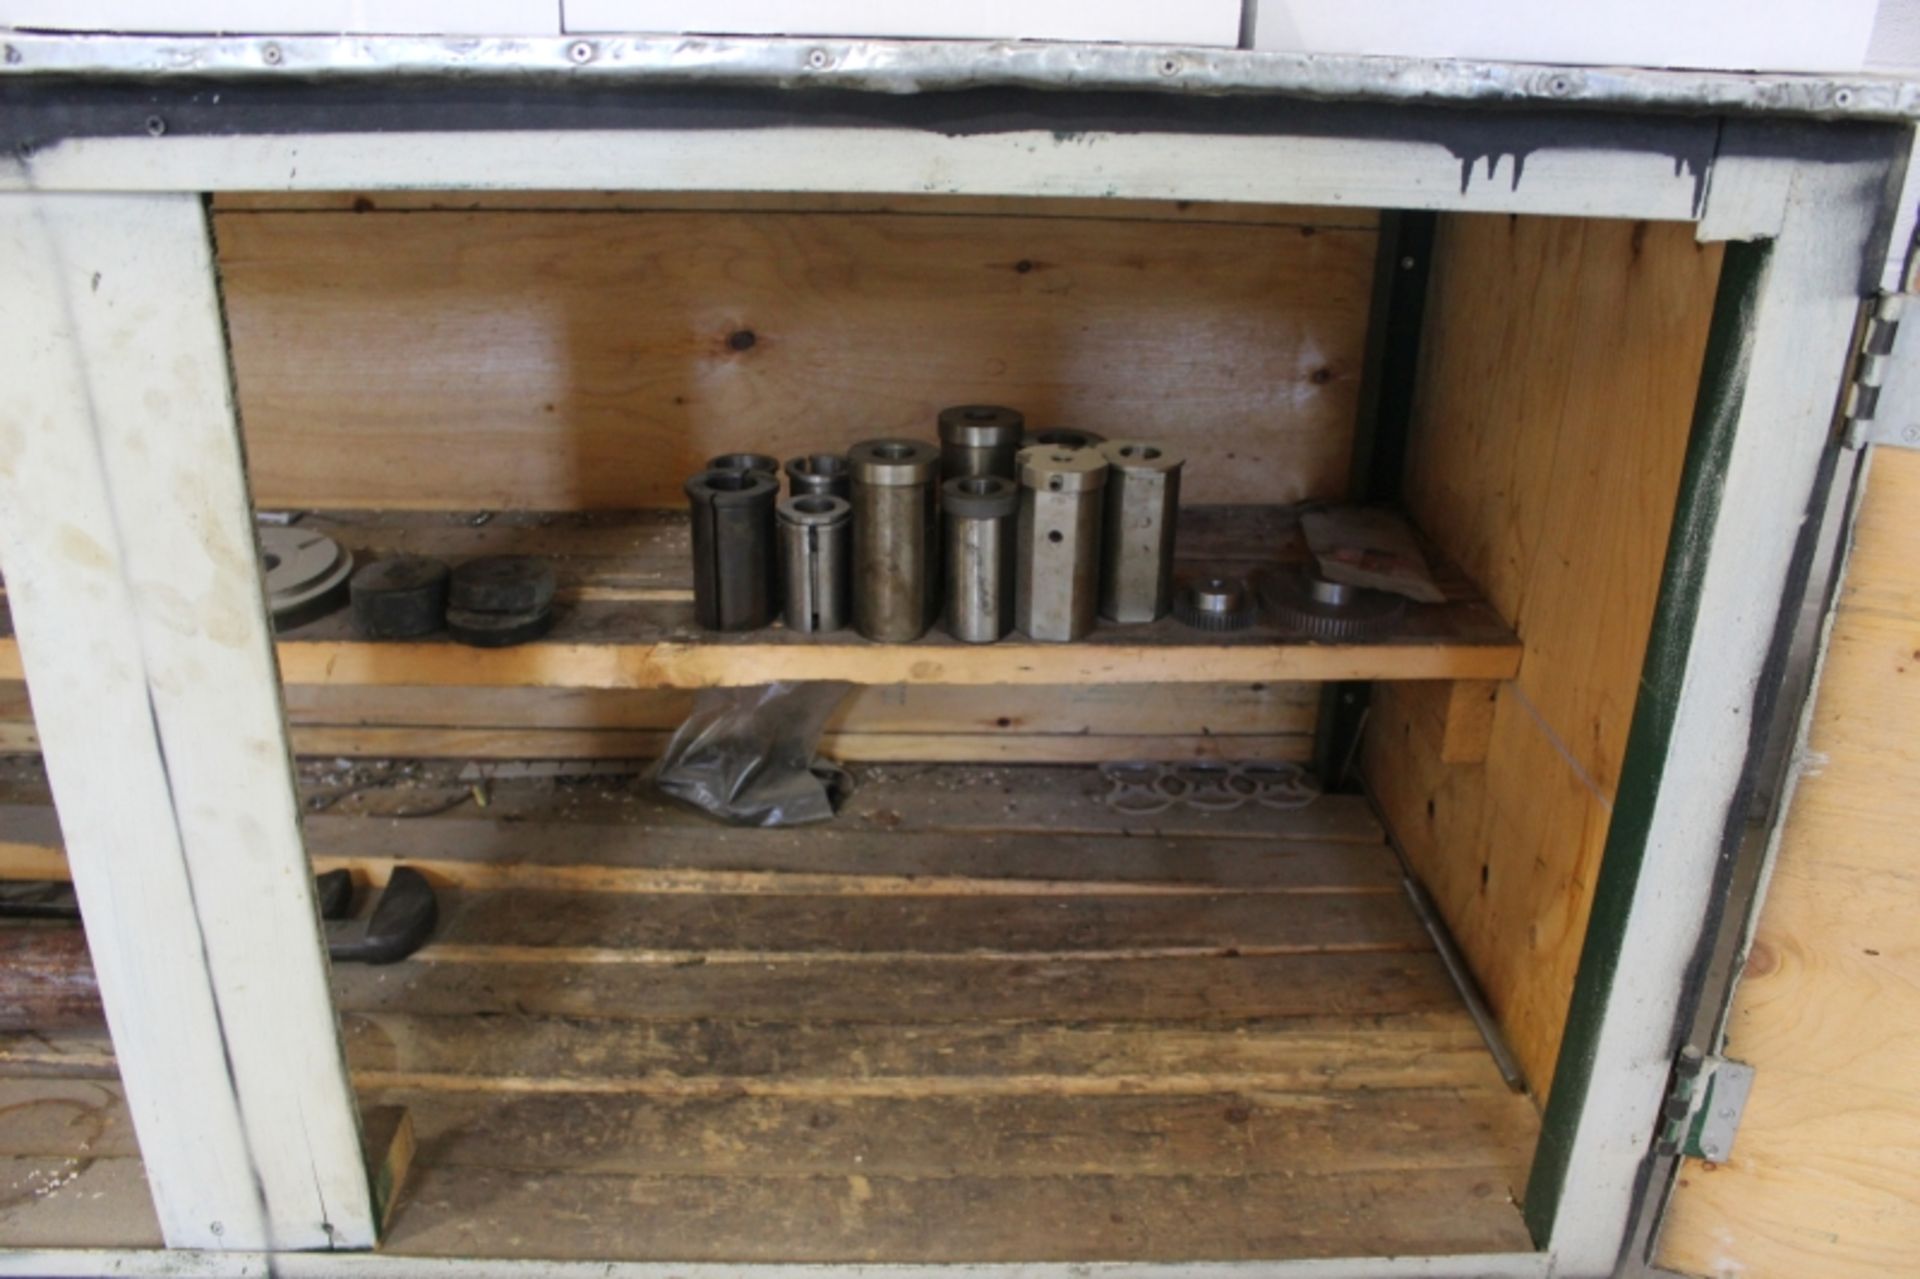 Work Bench with Assorted Sleeves, Boring bar, and Pipe Wrench - Image 3 of 4